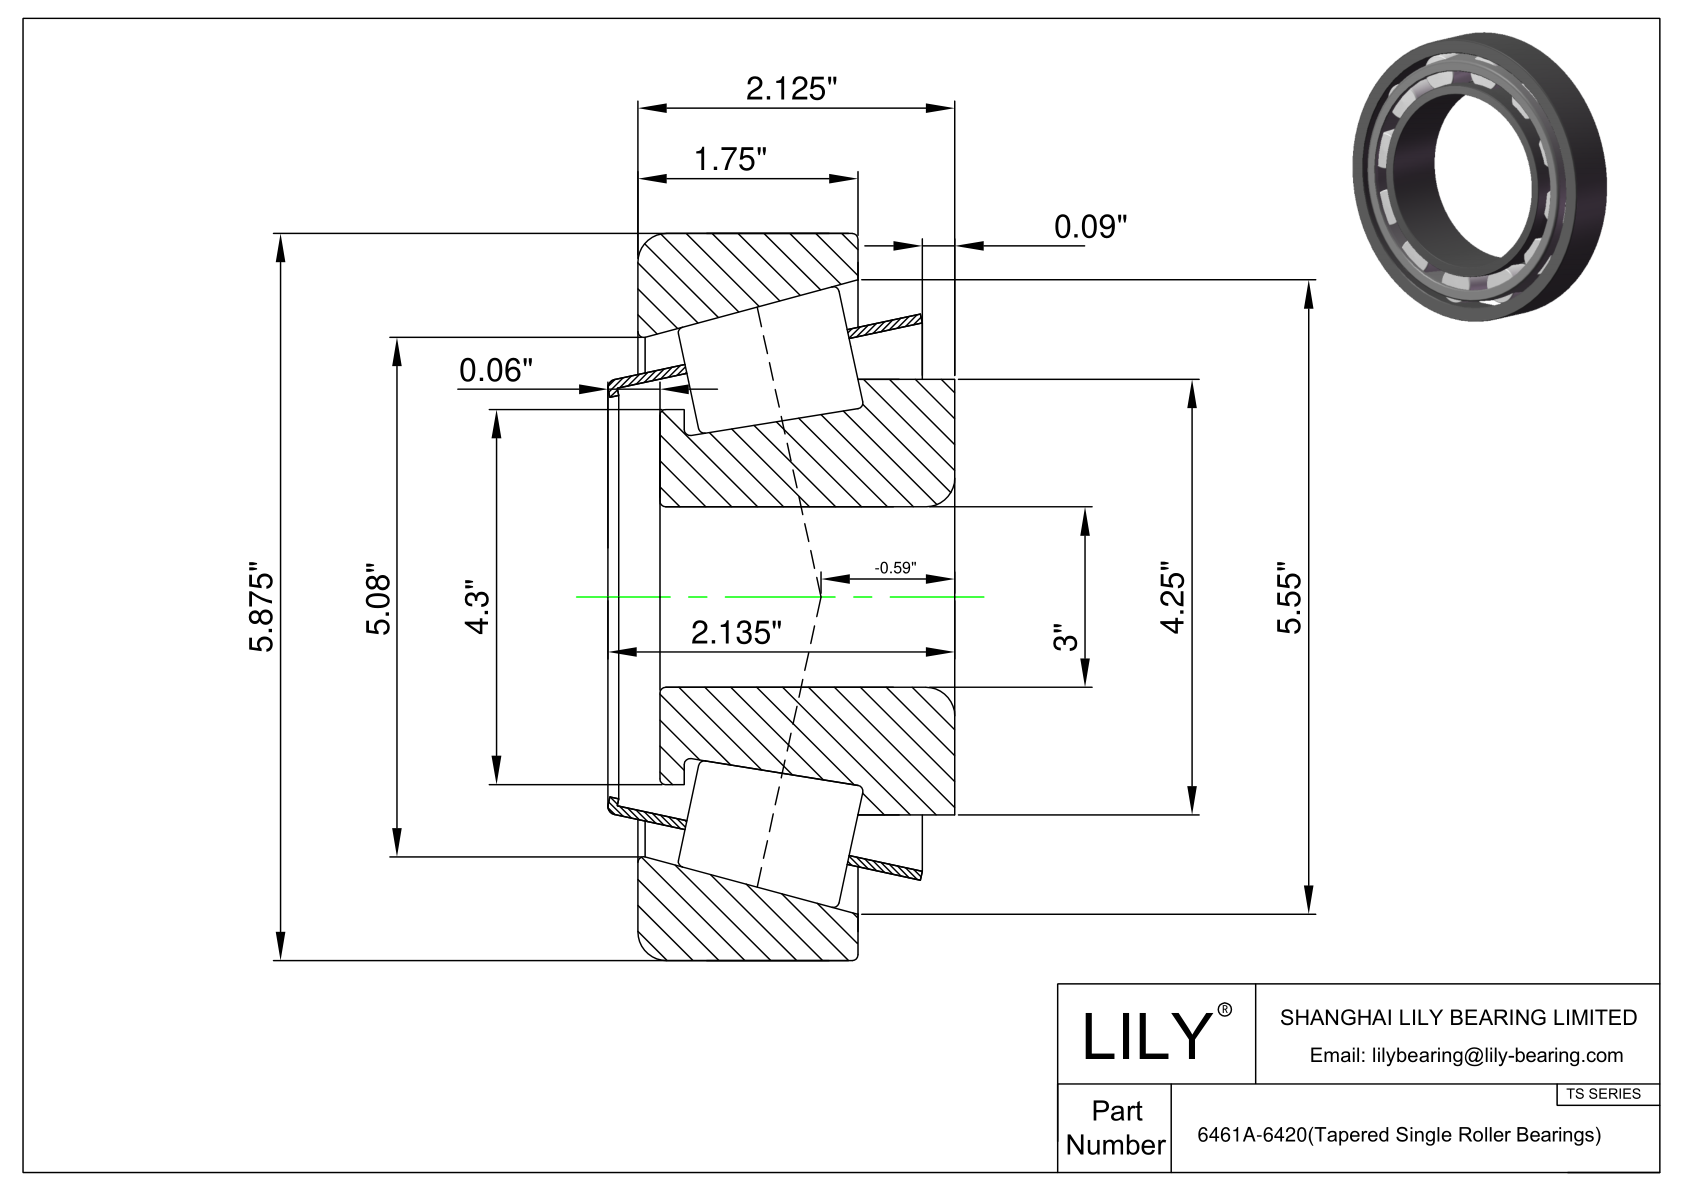 6461A-6420 TS (Tapered Single Roller Bearings) (Imperial) cad drawing